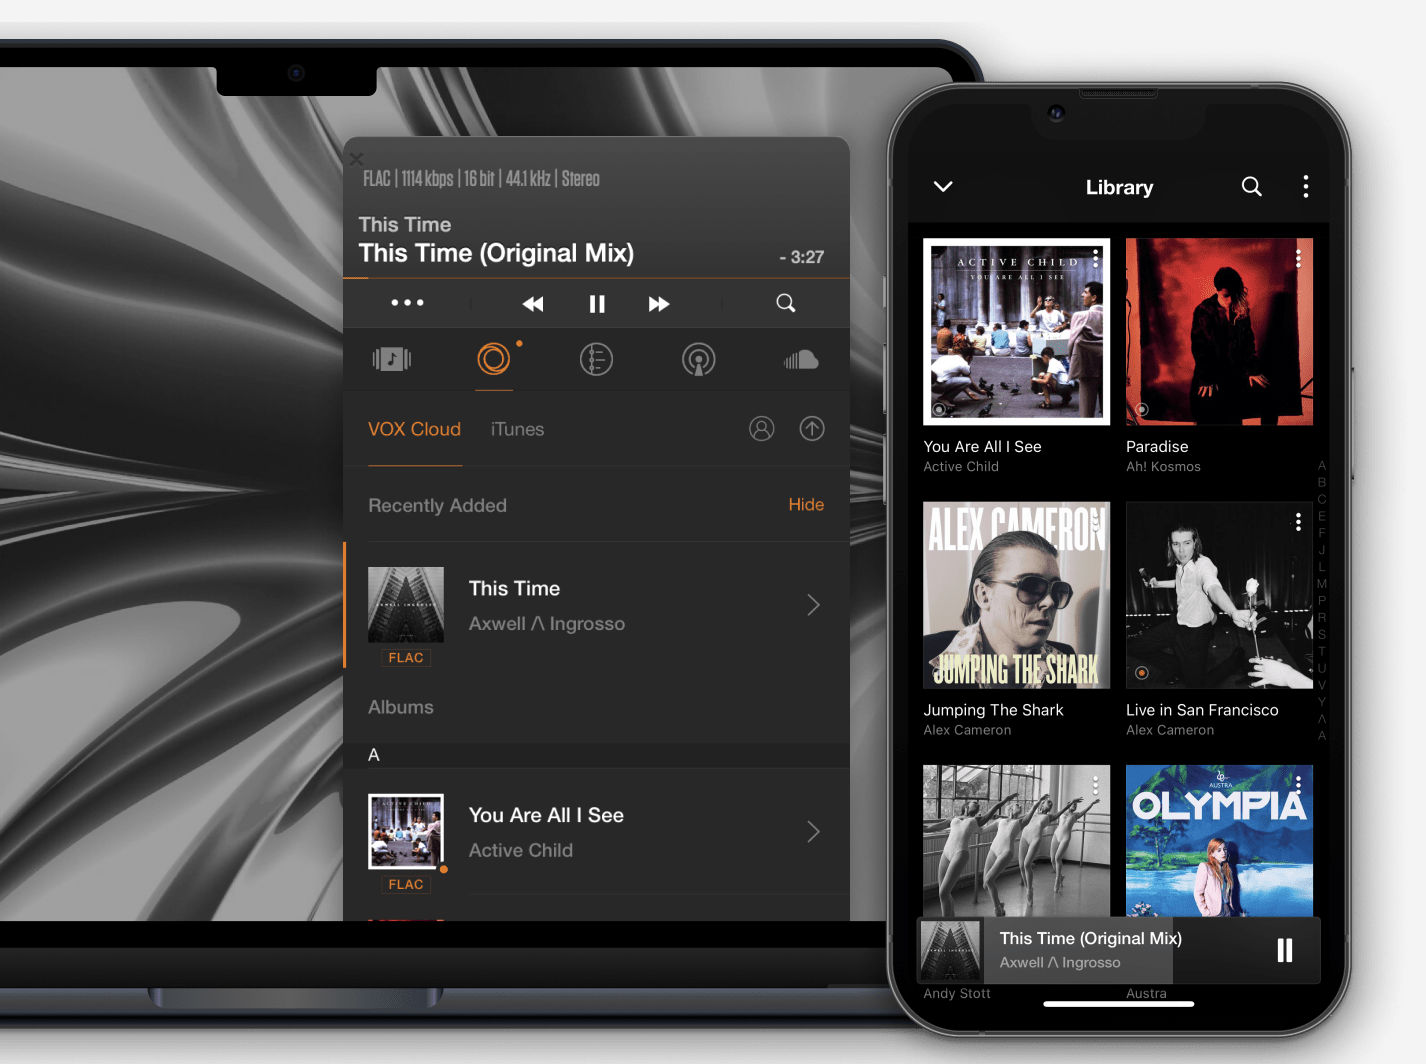 Download music to listen offline with  Music (Android